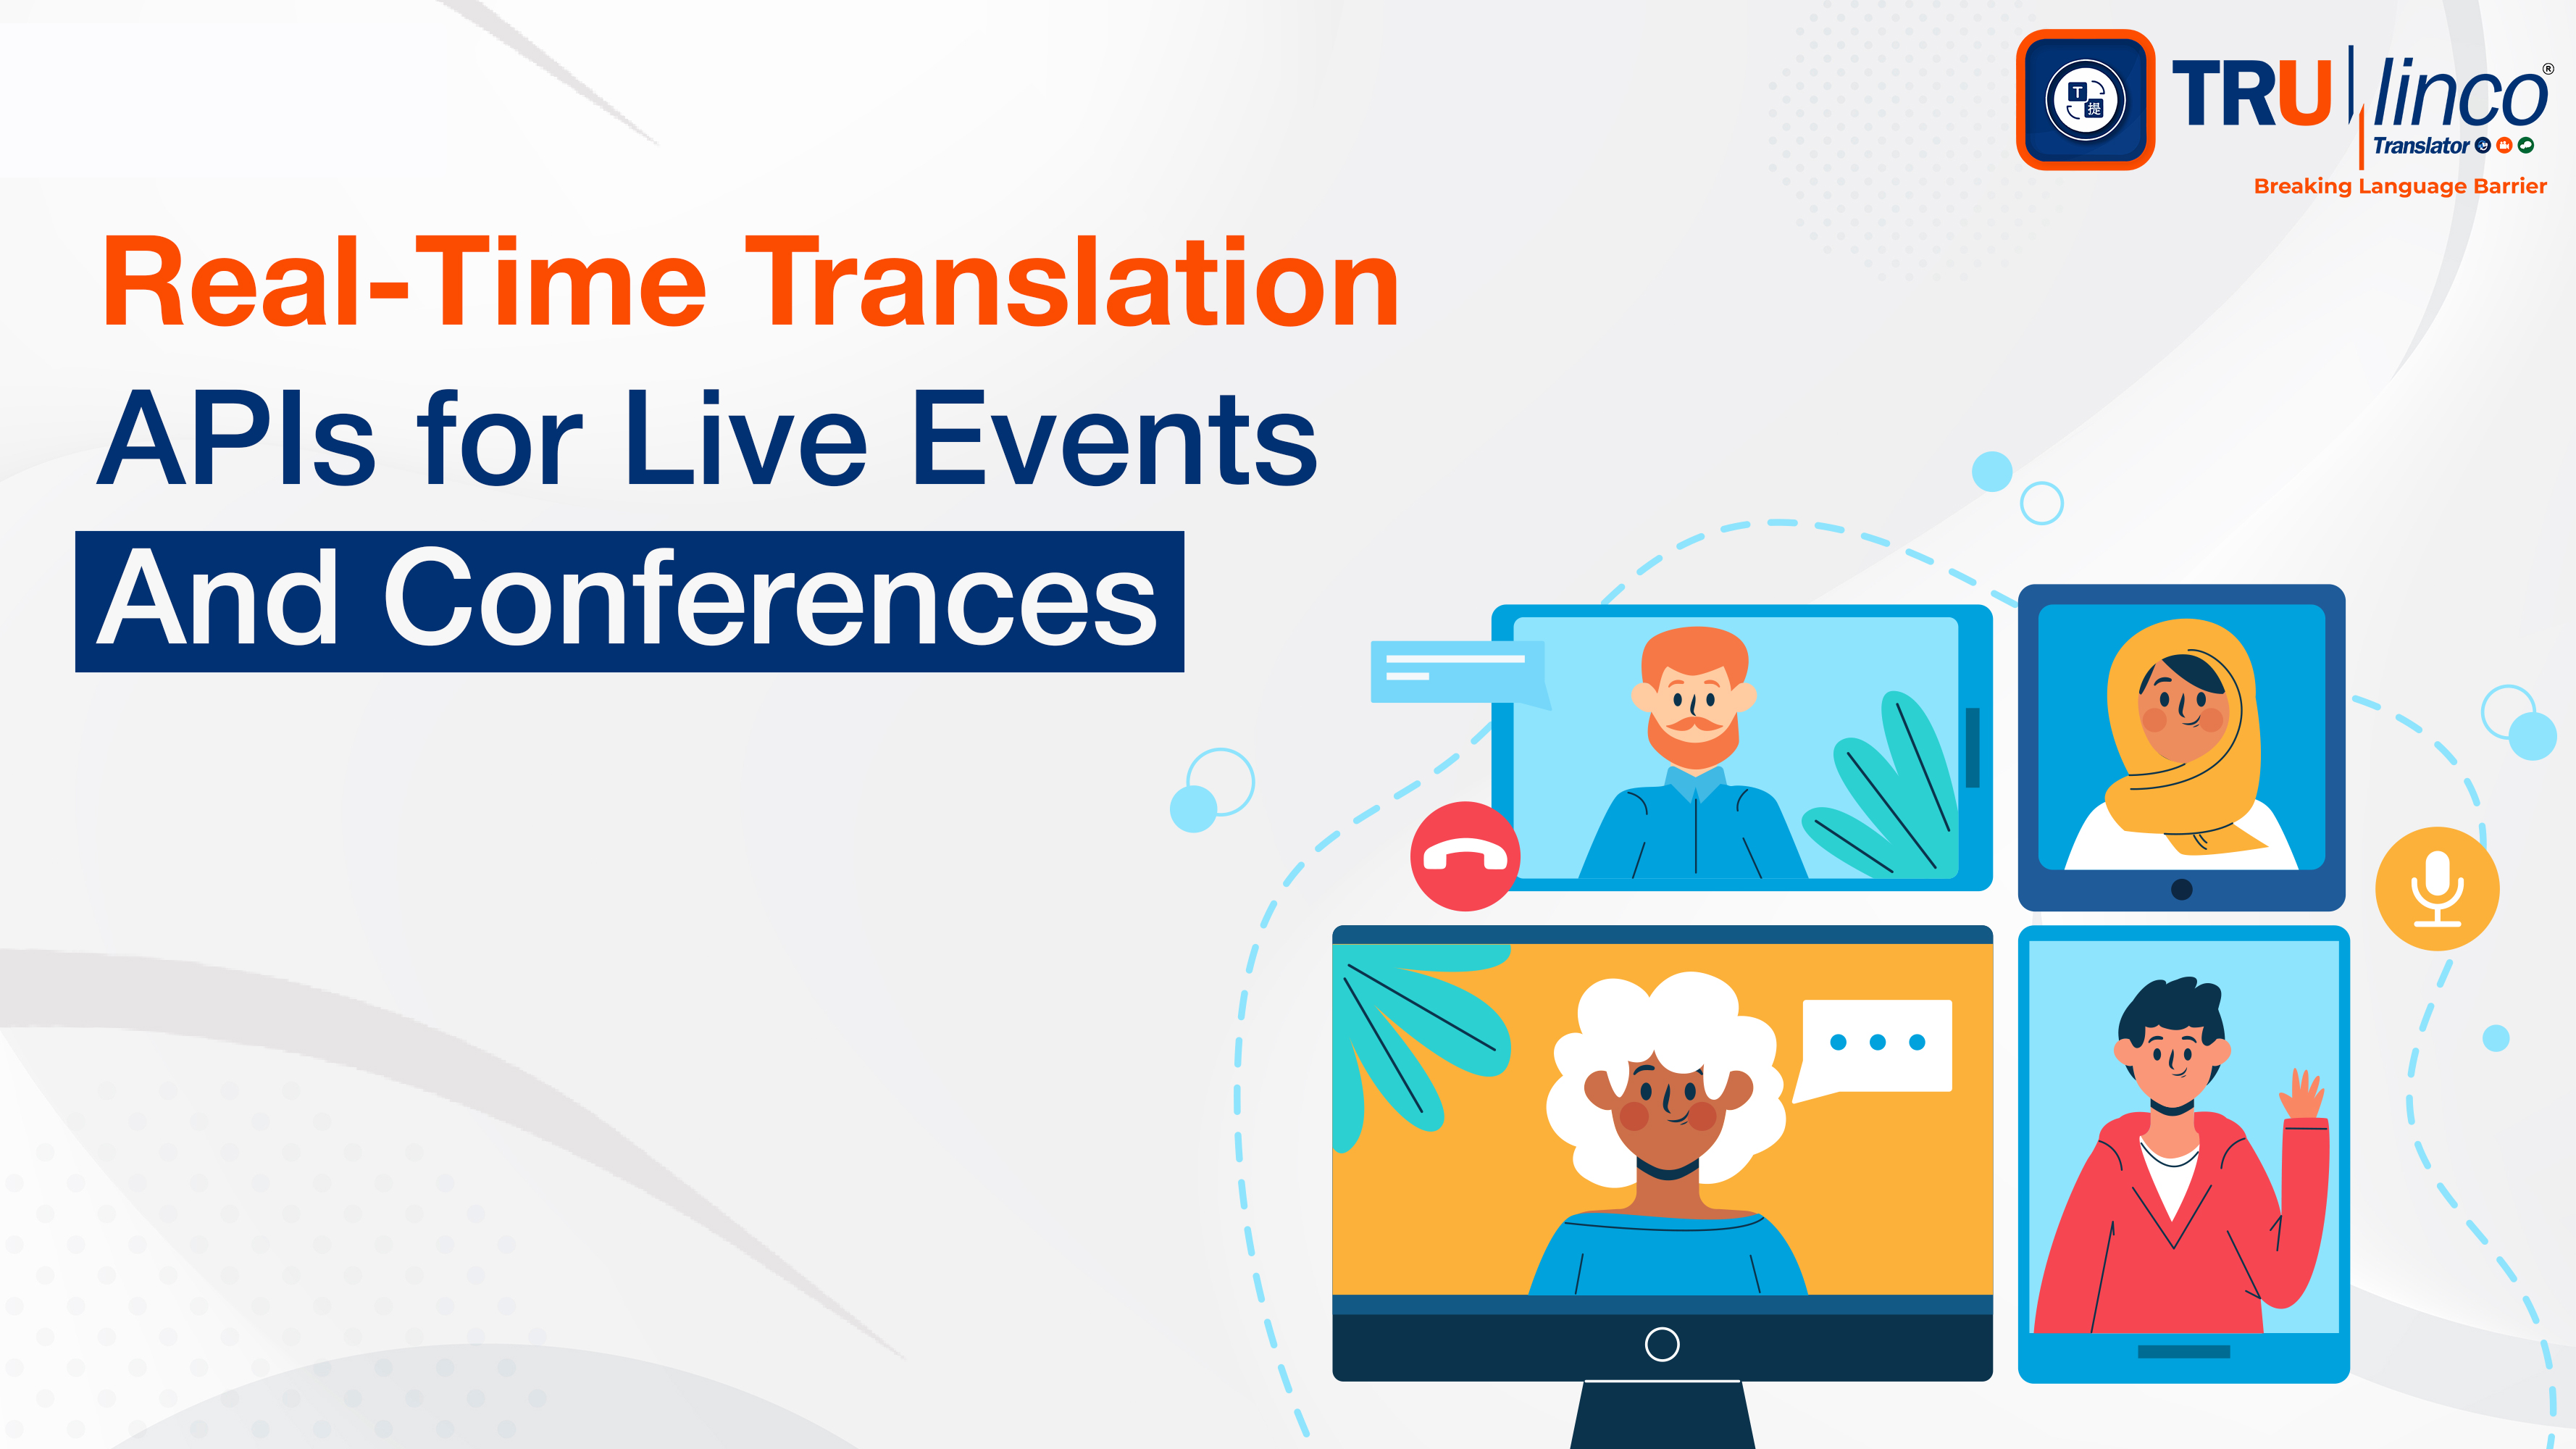 Real-Time Translation APIs for Live Events and Conferences